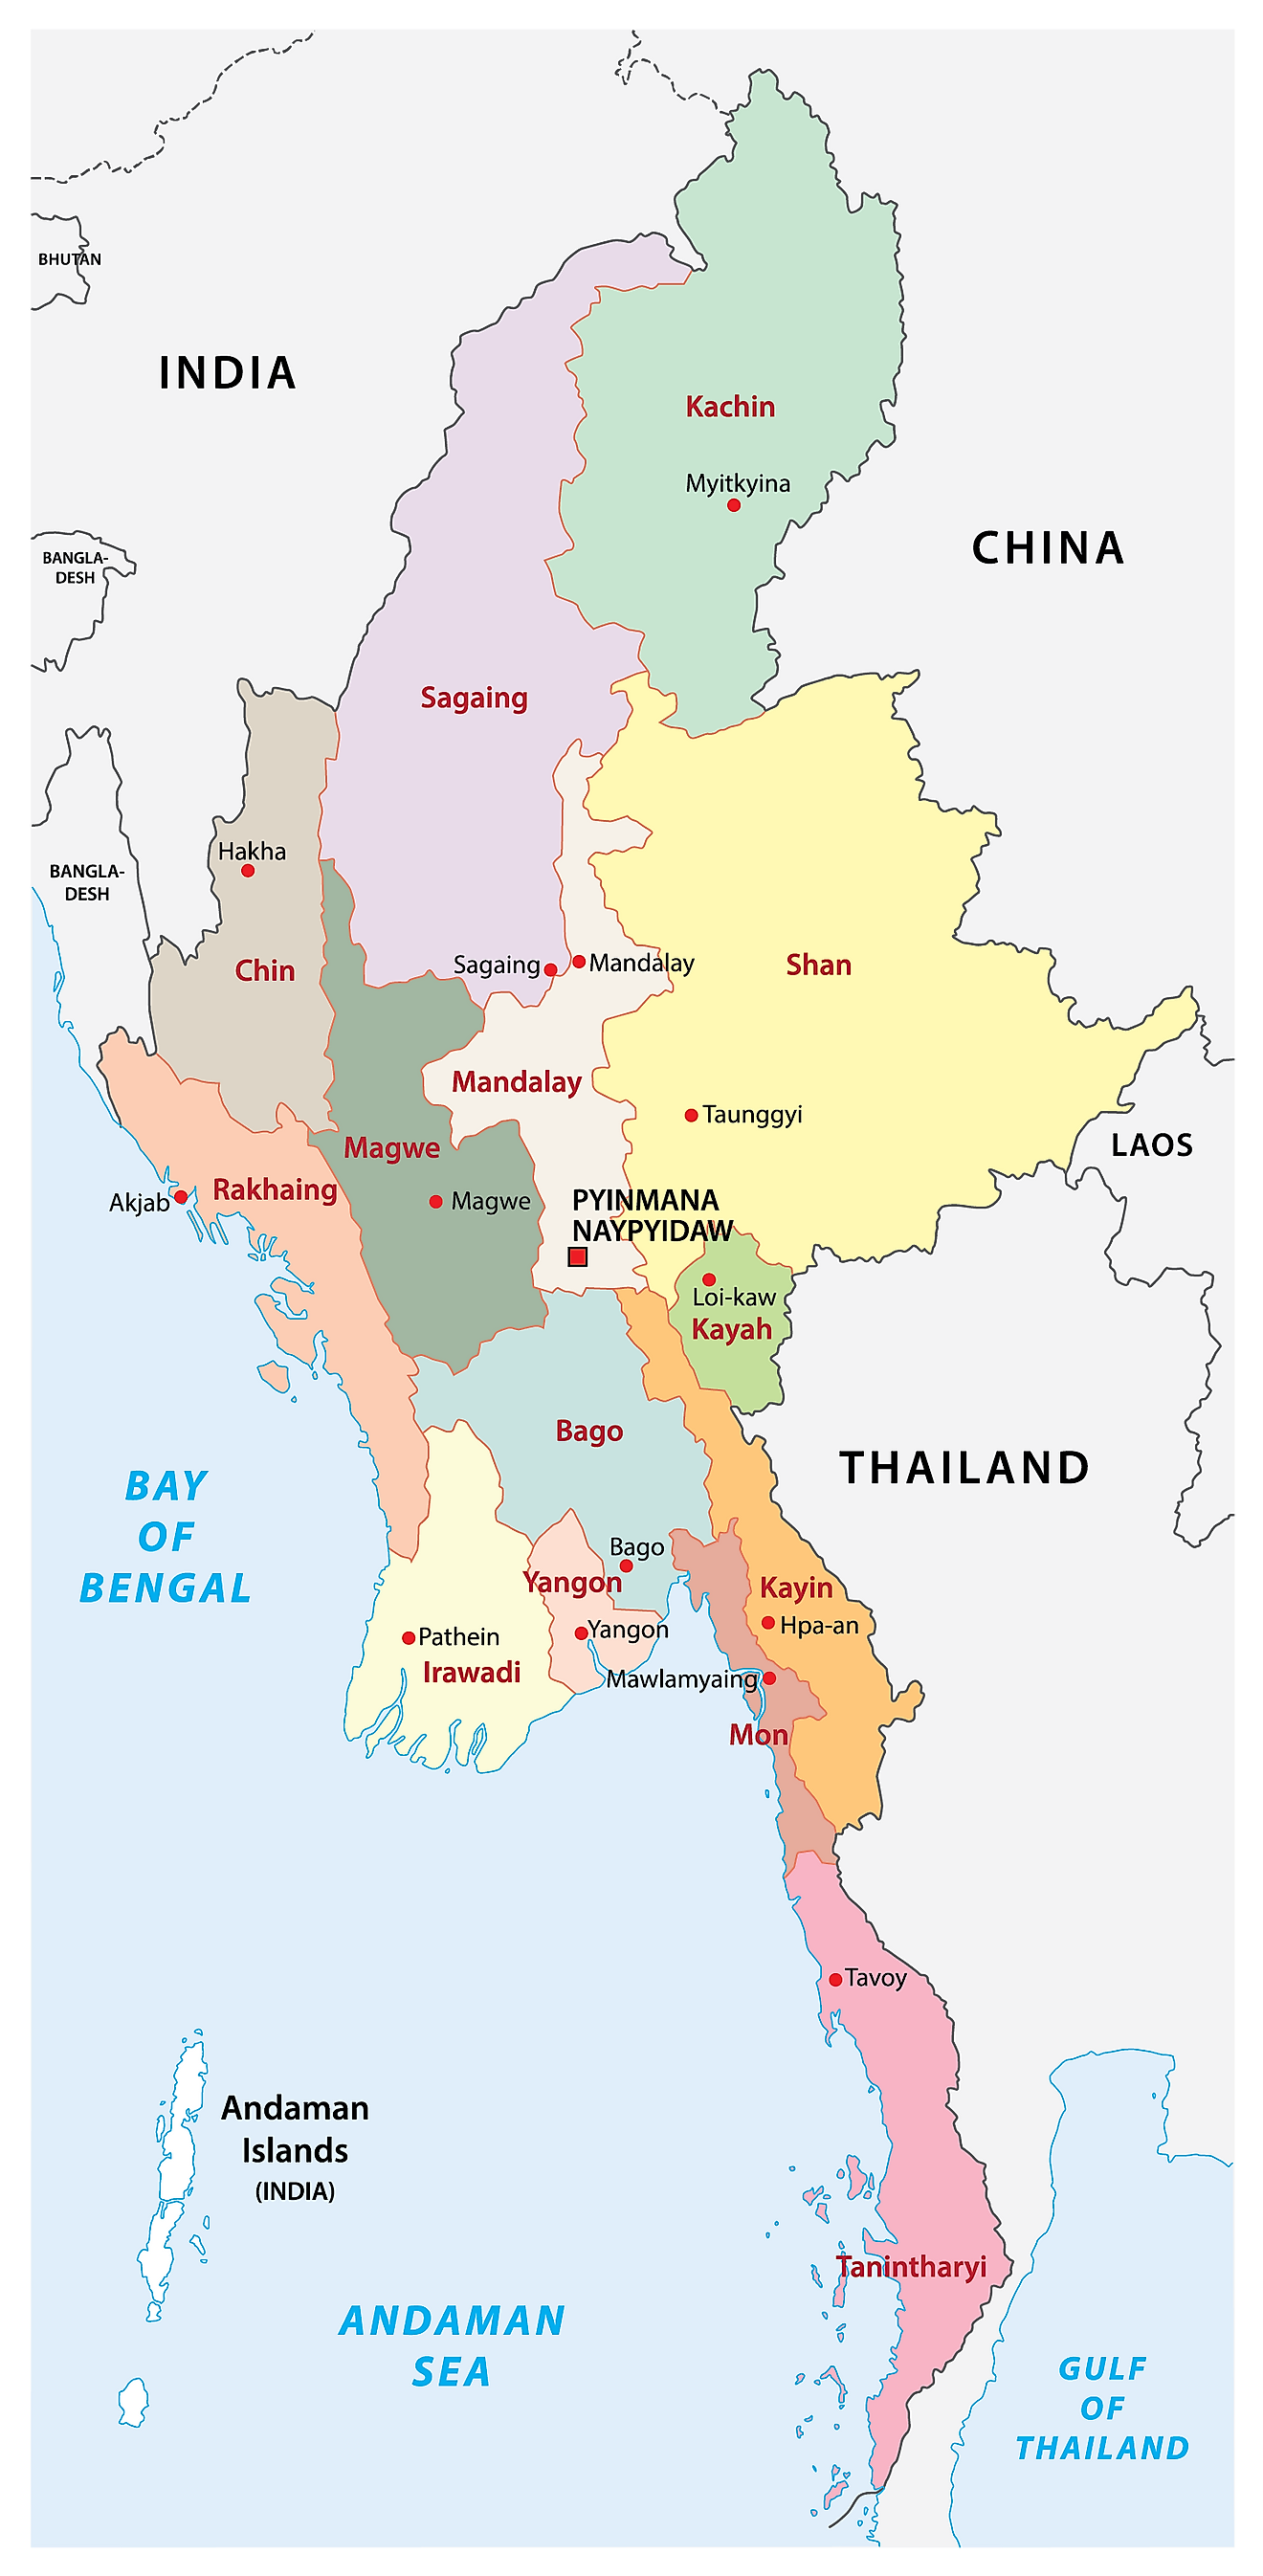 Political Map of Myanmar into 7 regions, their capitals, and the national capital of Naypyidaw.